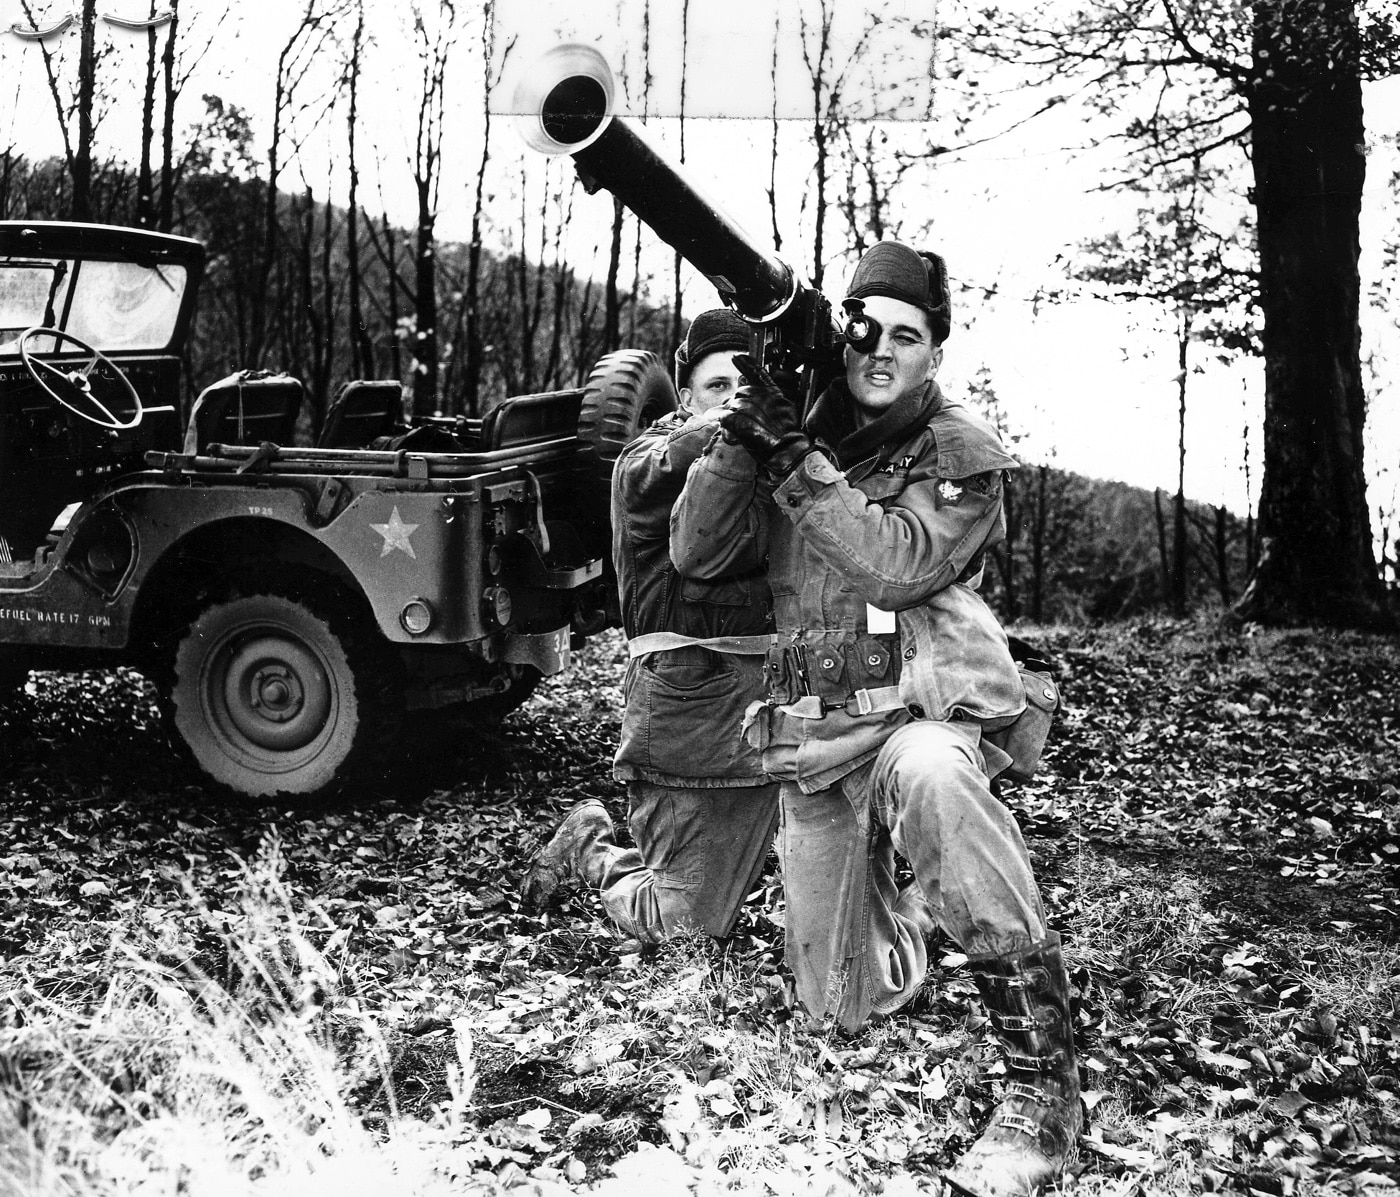 sgt elvis presley in germany 1960 with super bazooka m20a1